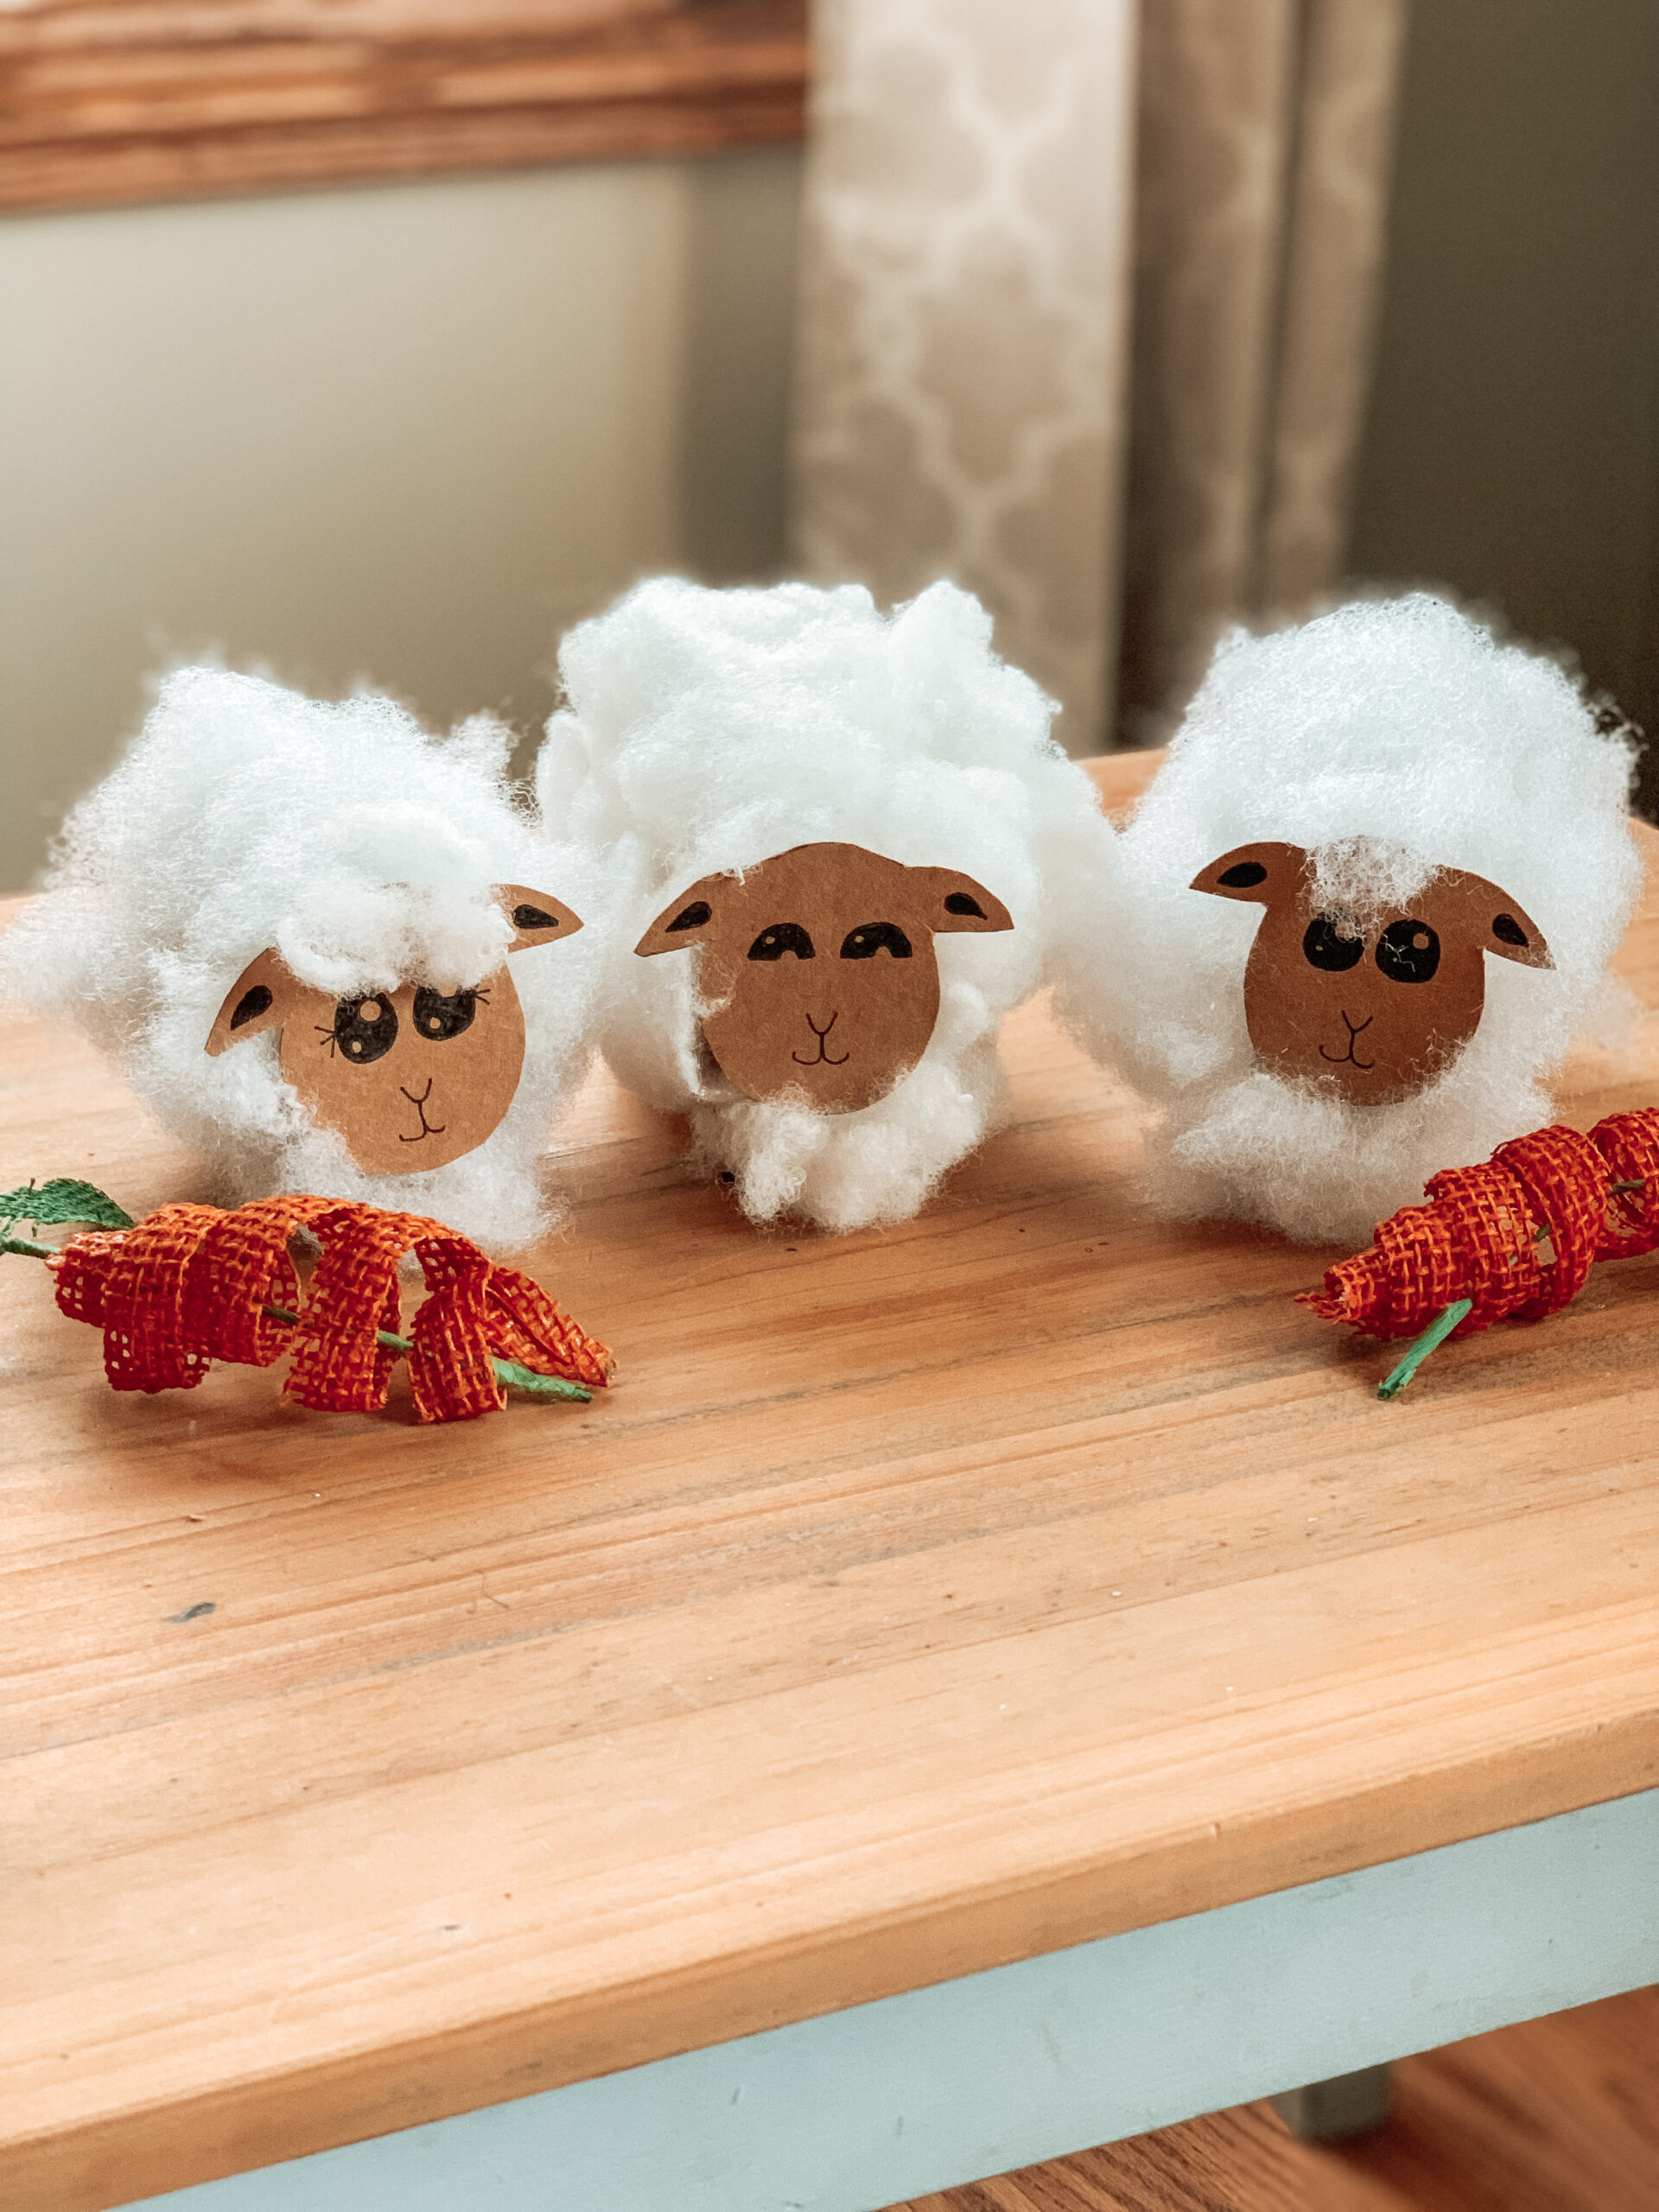 Completed kids craft of toilet paper roll sheep